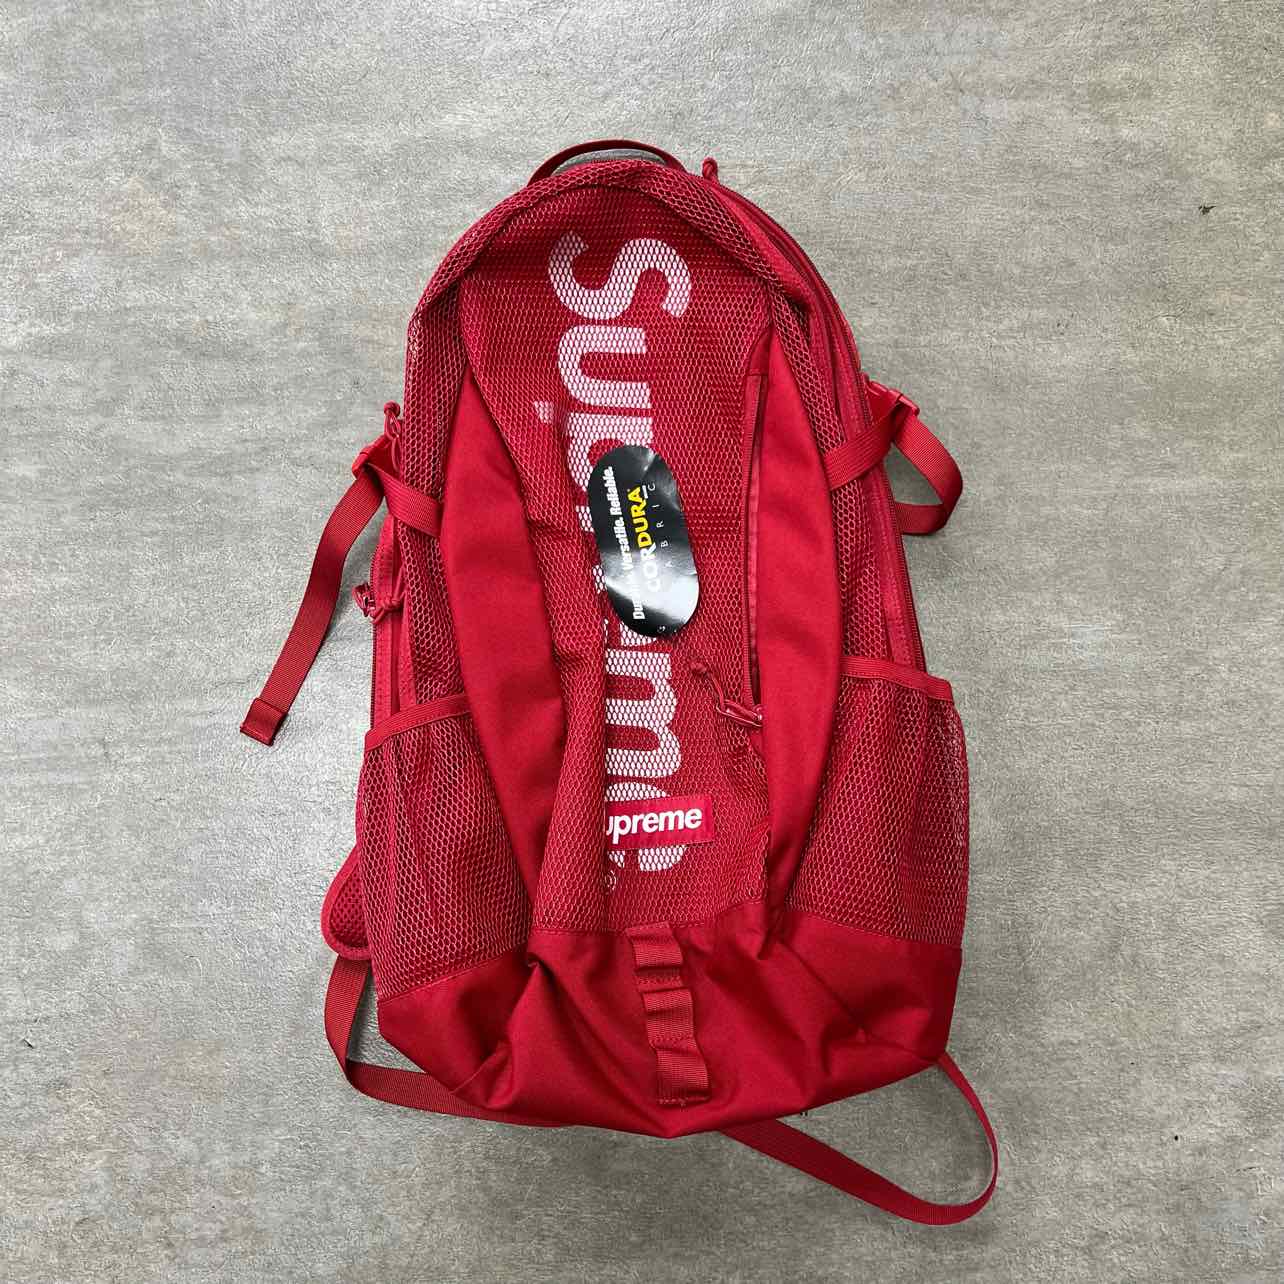 Supreme Backpack "SS20" New Dark Red Size OS